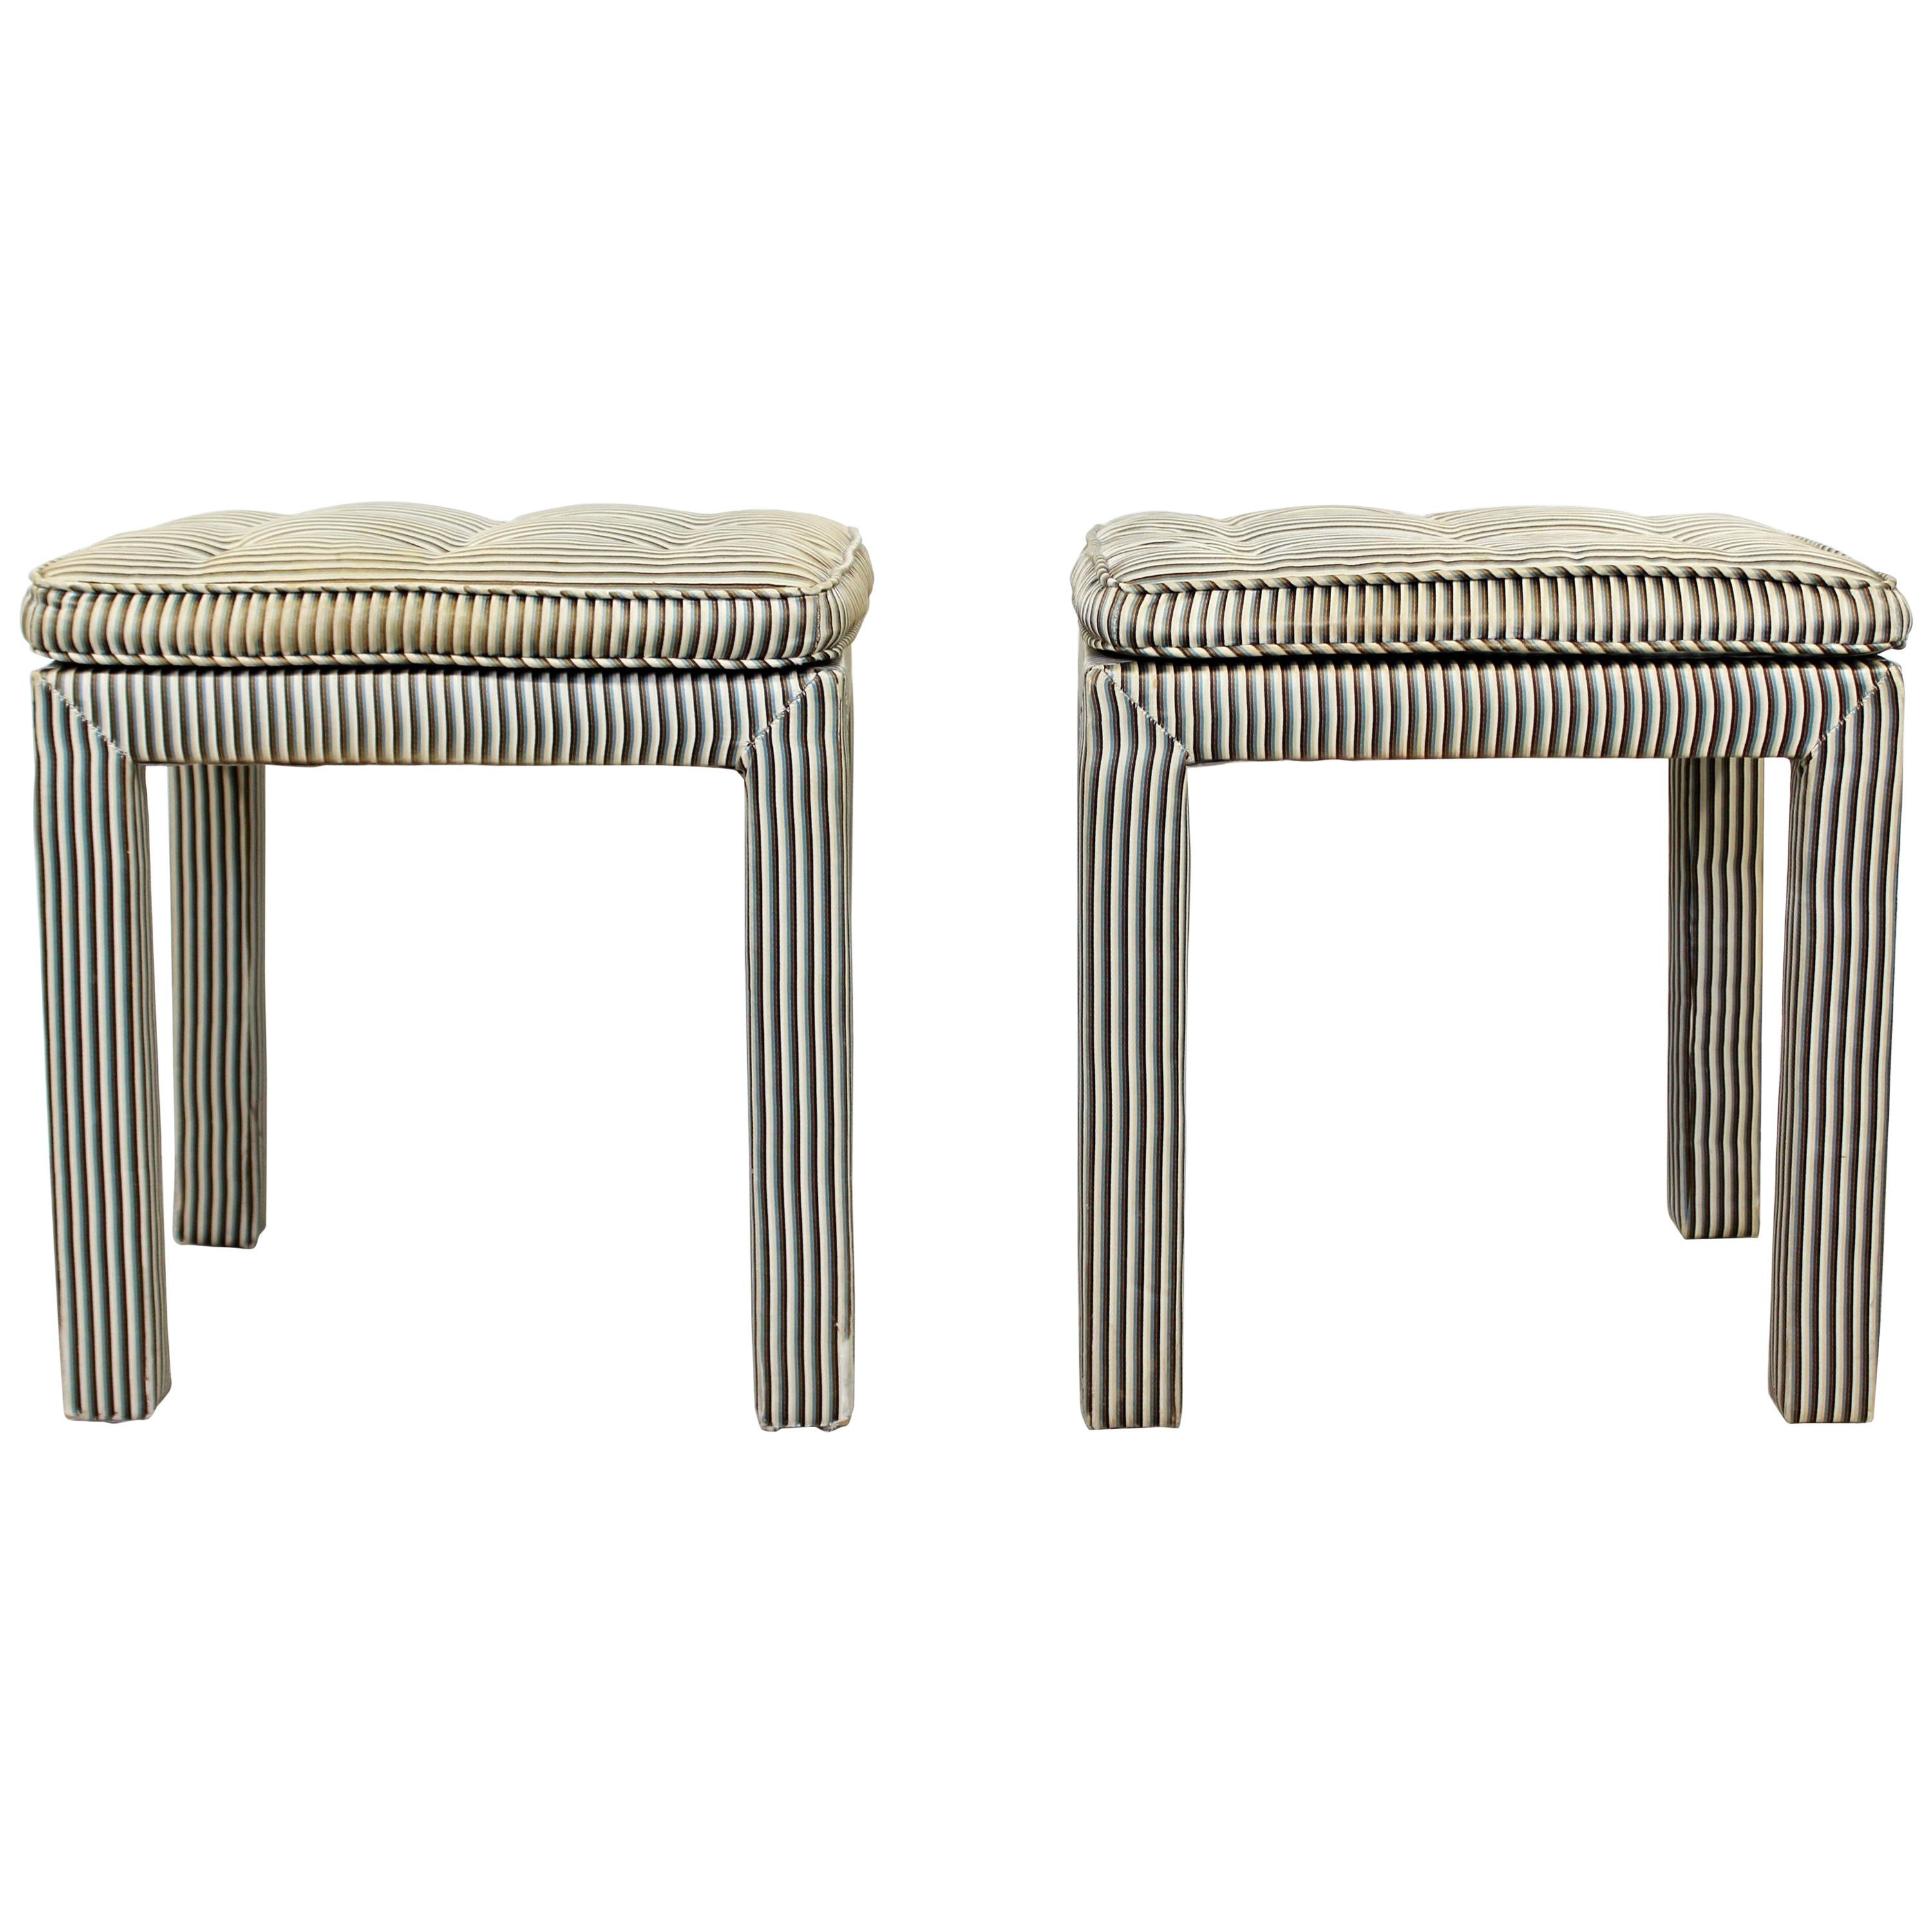 Mid-Century Modern Pair of Tufted Benches Stools Ottomans Baughman Parsons 1960s